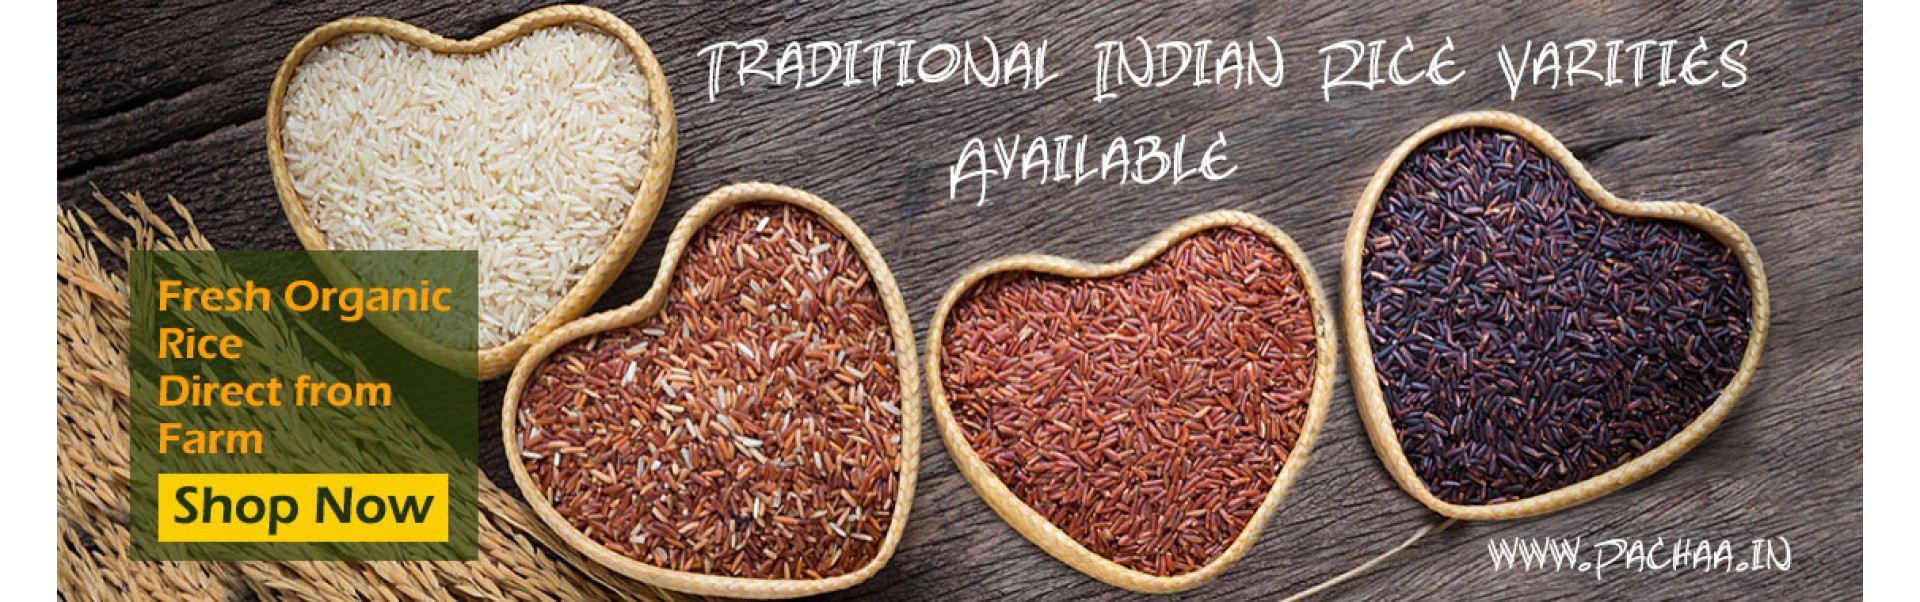 Traditional Indian Rices